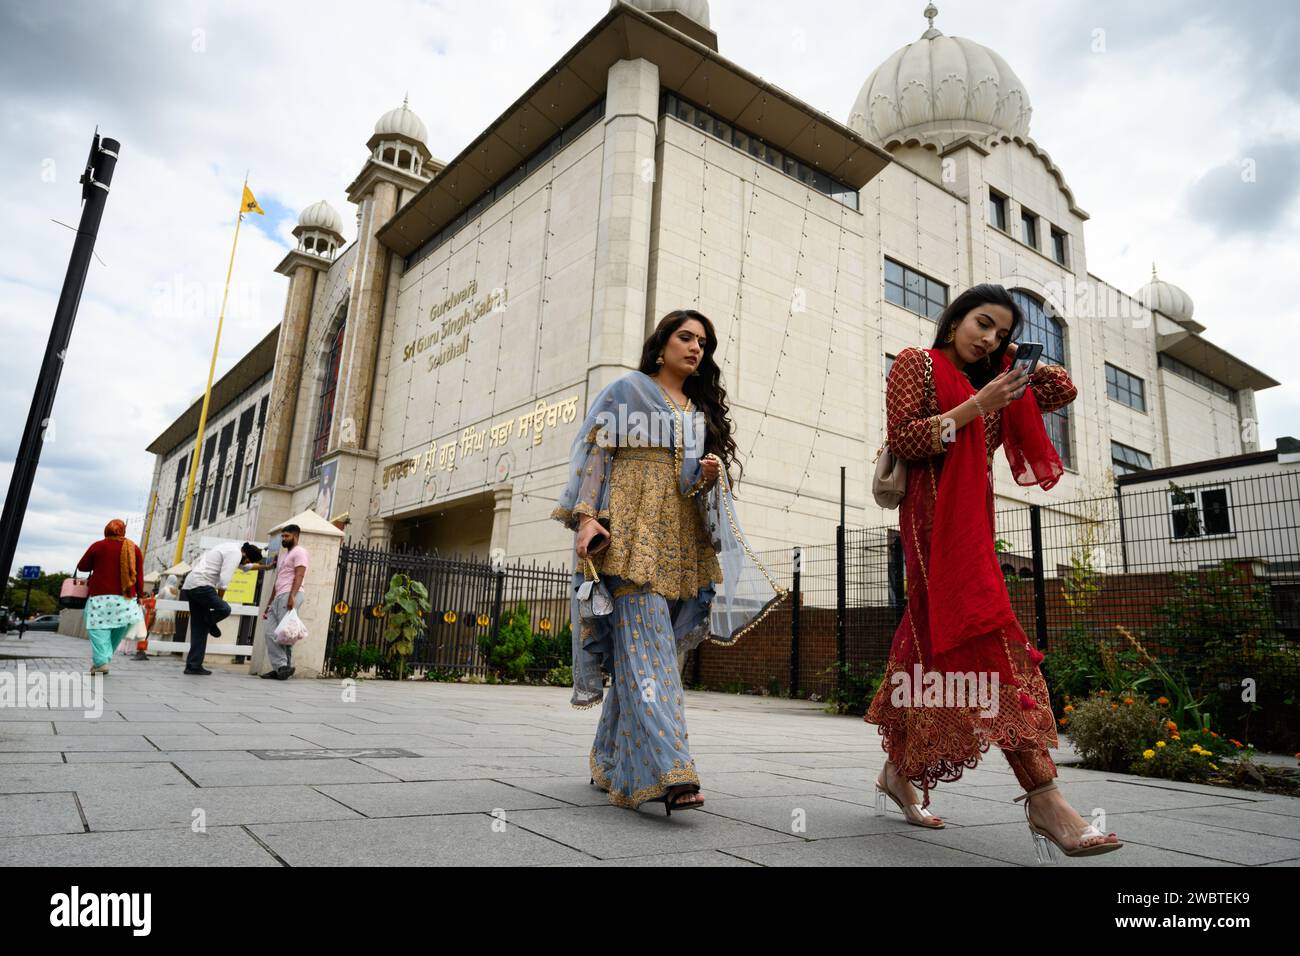 29th August, 2022: Southall, in the borough of Ealing in West London, is home to the largest Punjabi community outside the Indian subcontinent. It has become a hub of Asian culture in the UK, often referred to as Little India. The photograph features Sikh worshippers passing the Gurdwara Sri Guru Singh Sabha temple. Stock Photo